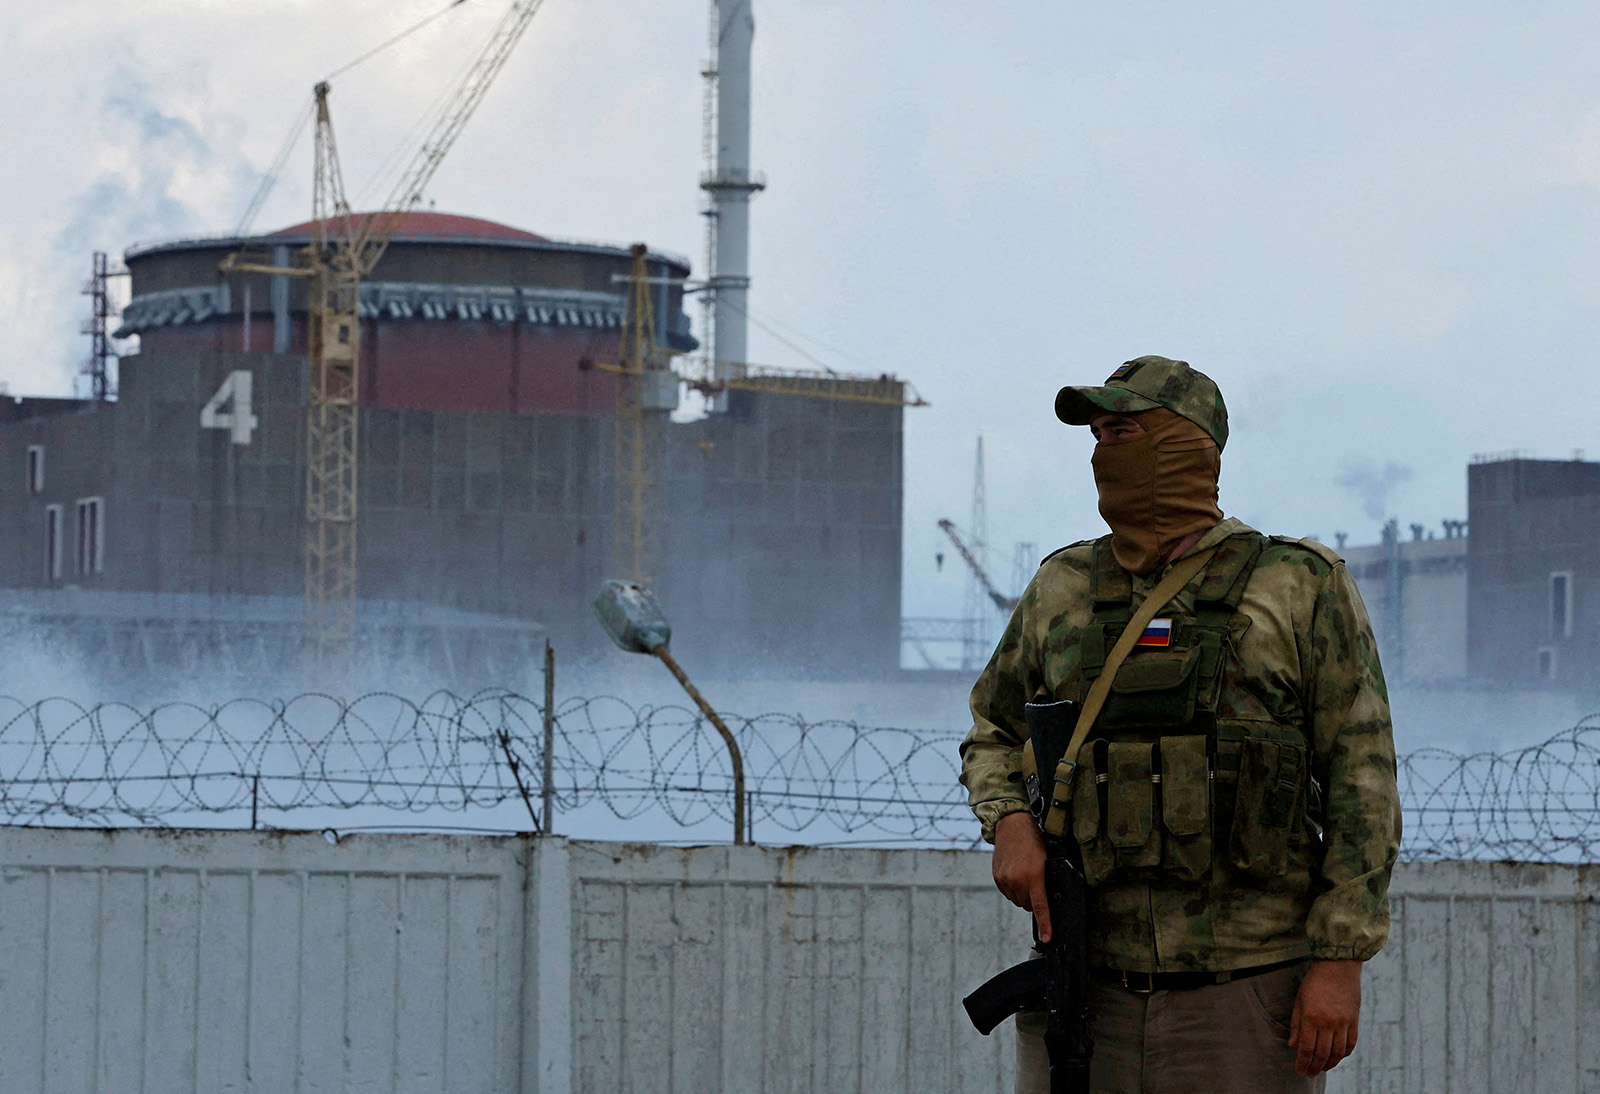 A serviceman with a Russian flag on his uniform stands guard near the Zaporizhzhia Nuclear Power Plant, outside the Russian-controlled city of Enerhodar, Ukraine, on August 4.